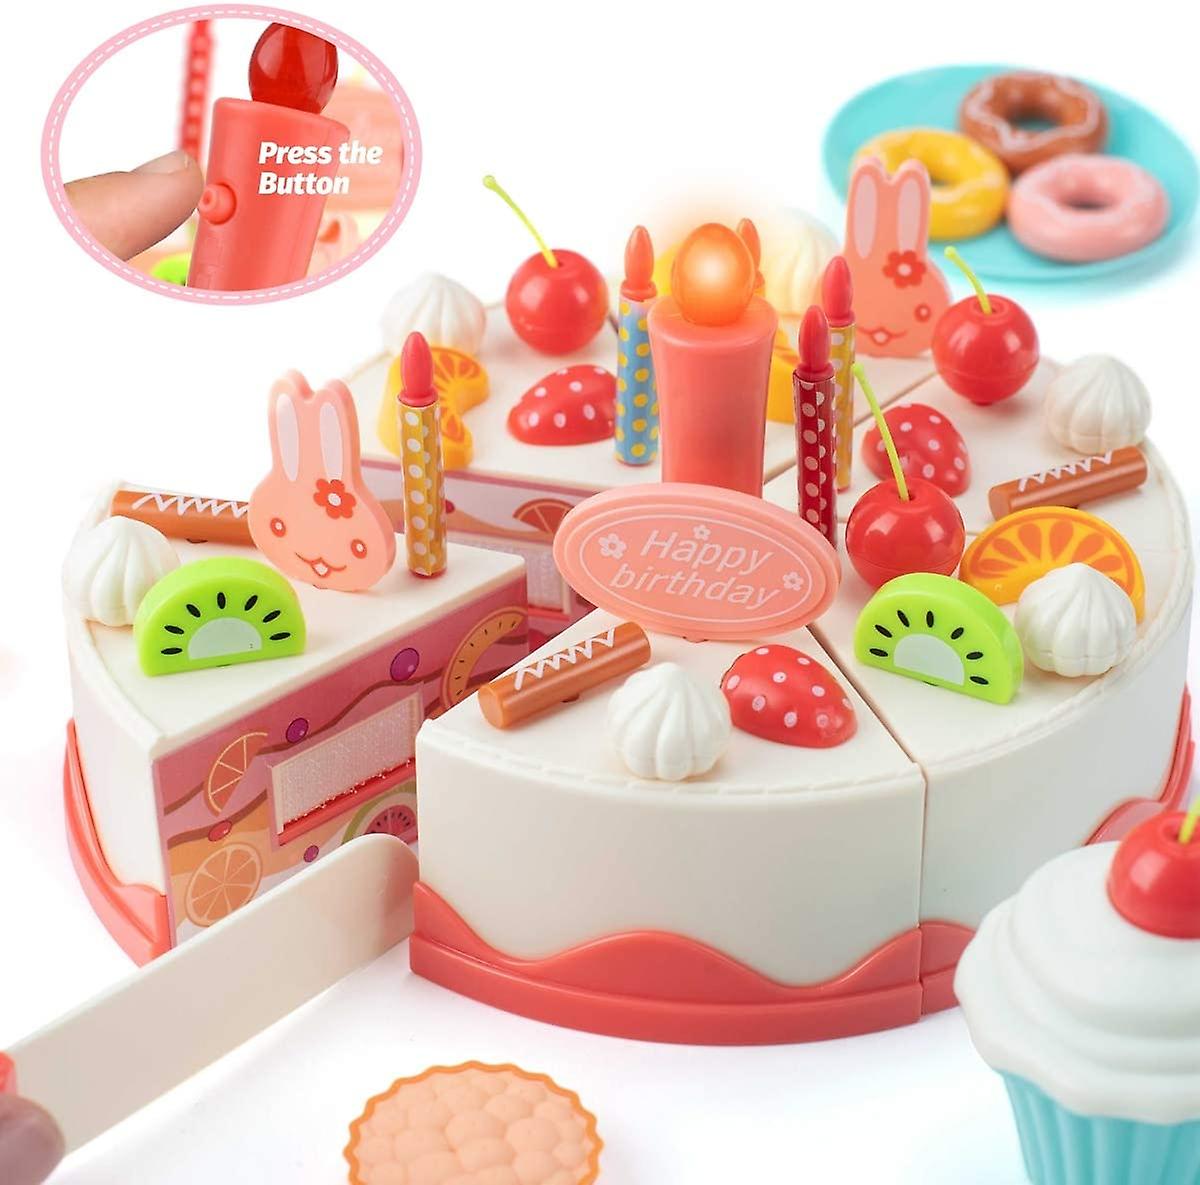 Cake Toy Food Set， 83 Pcs Cutting And Decorating Birthday Cake Pretend Toys Role Play Food Sets For Children Kids， Educational Learning Kitchen Playse